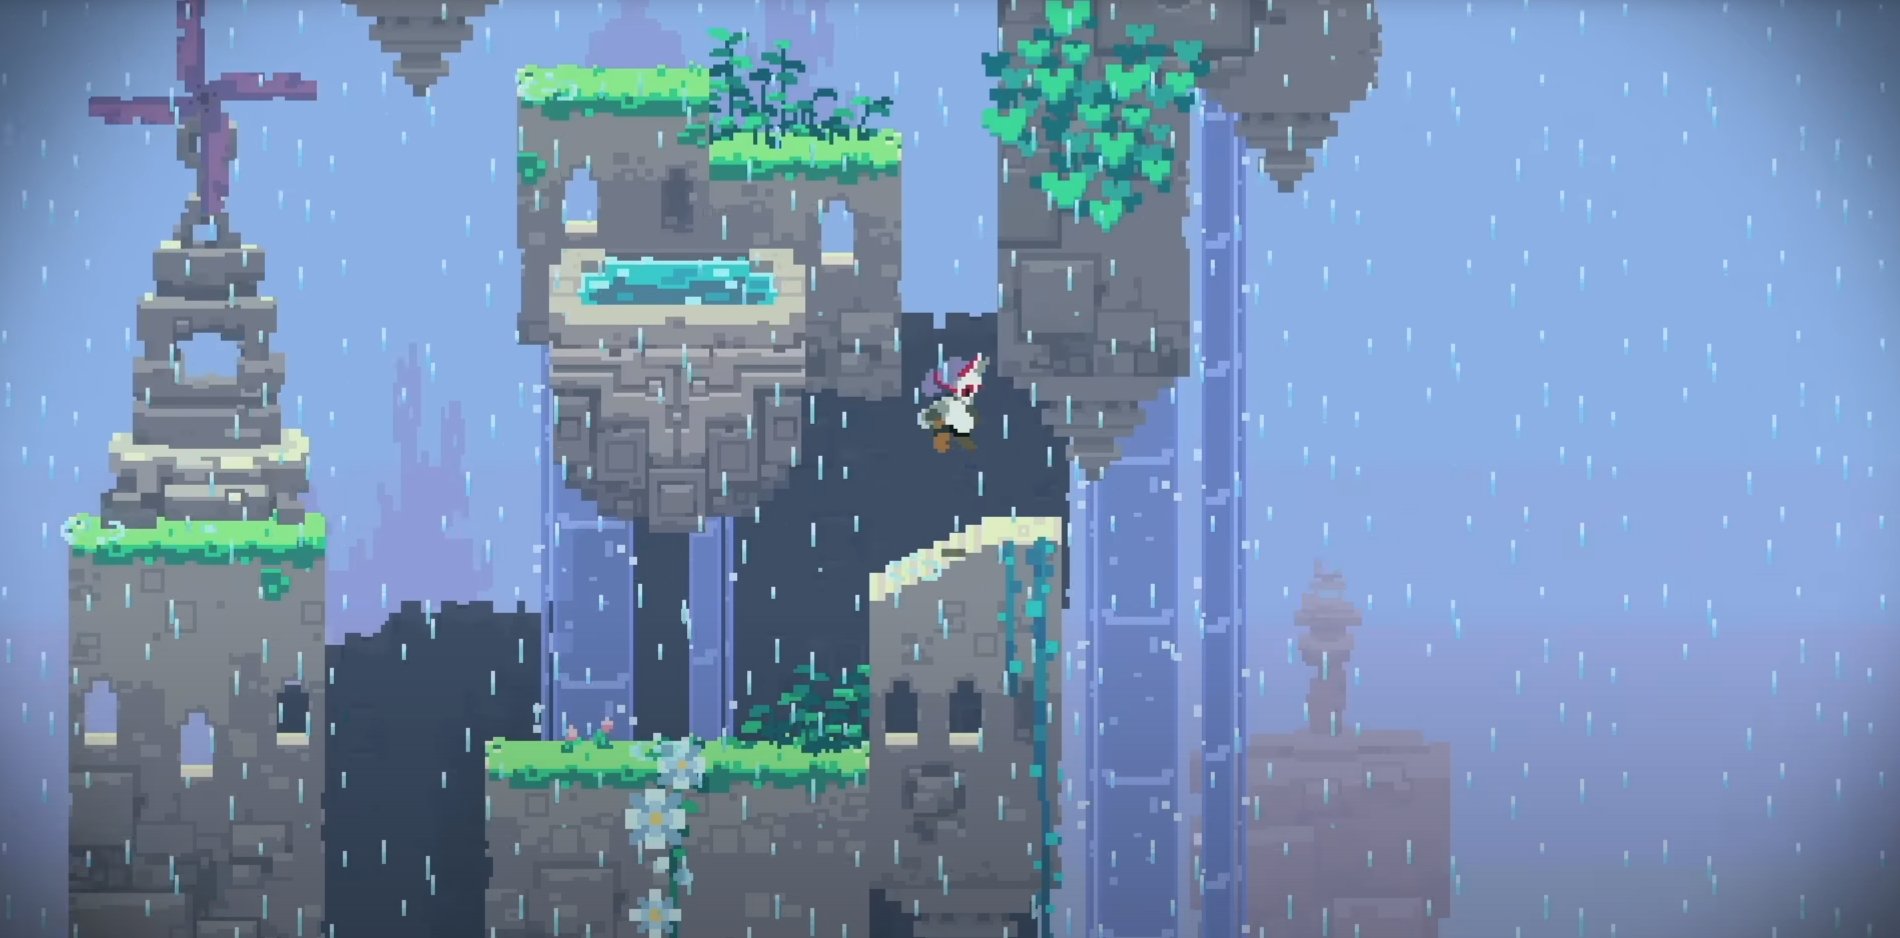 Lucky Luna Takes the Platformer in a New Direction